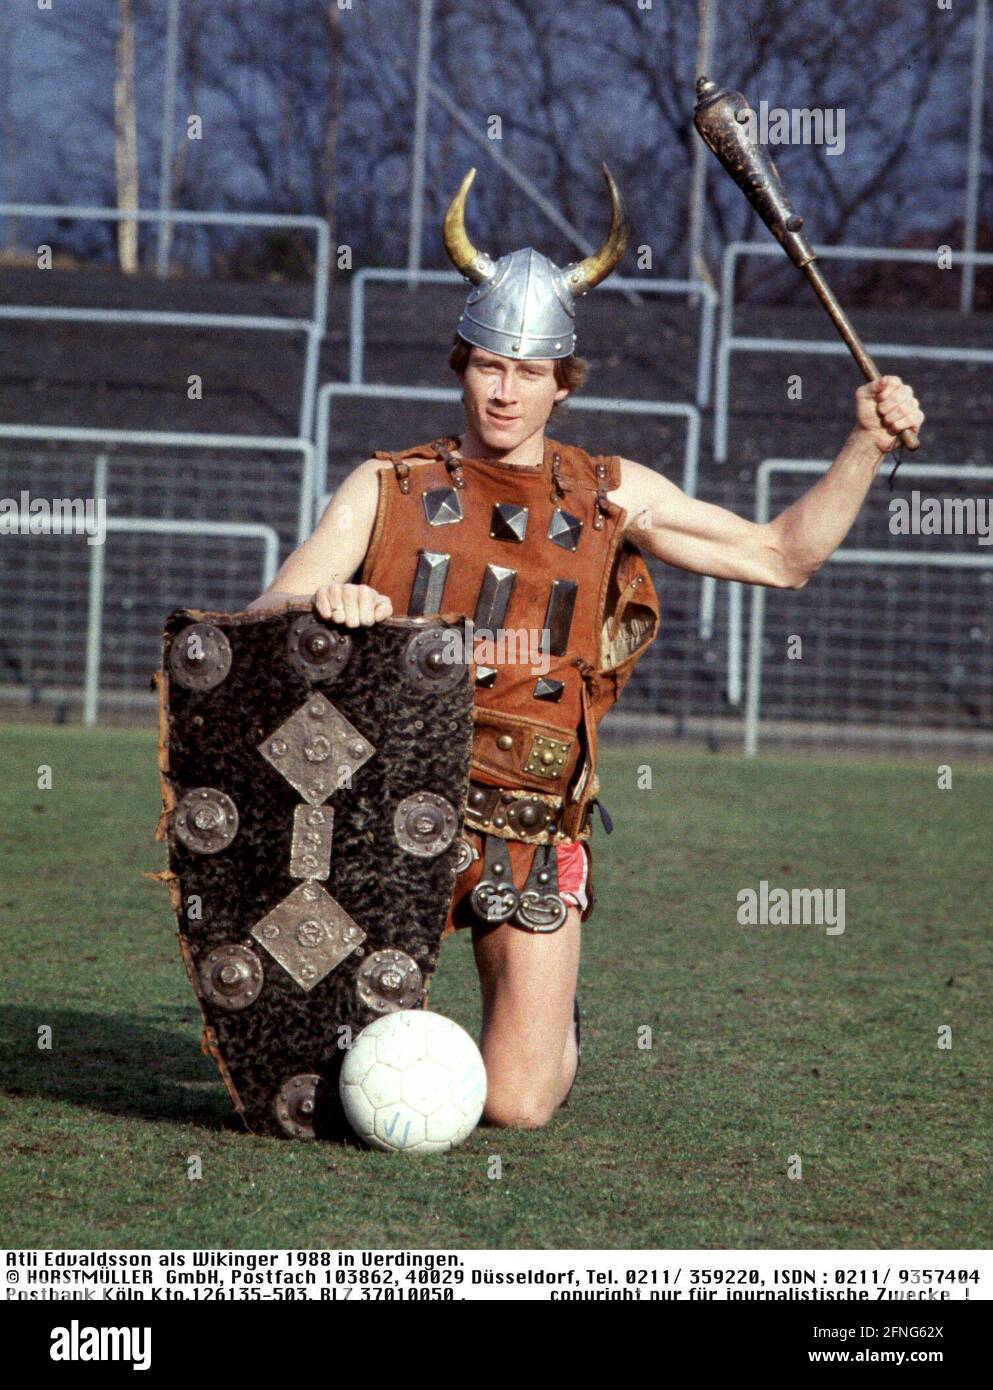 Atli Edvaldsson as a Viking in 1988 in Uerdingen, will be sixty years old on 3.3.2007. [automated translation] Stock Photo